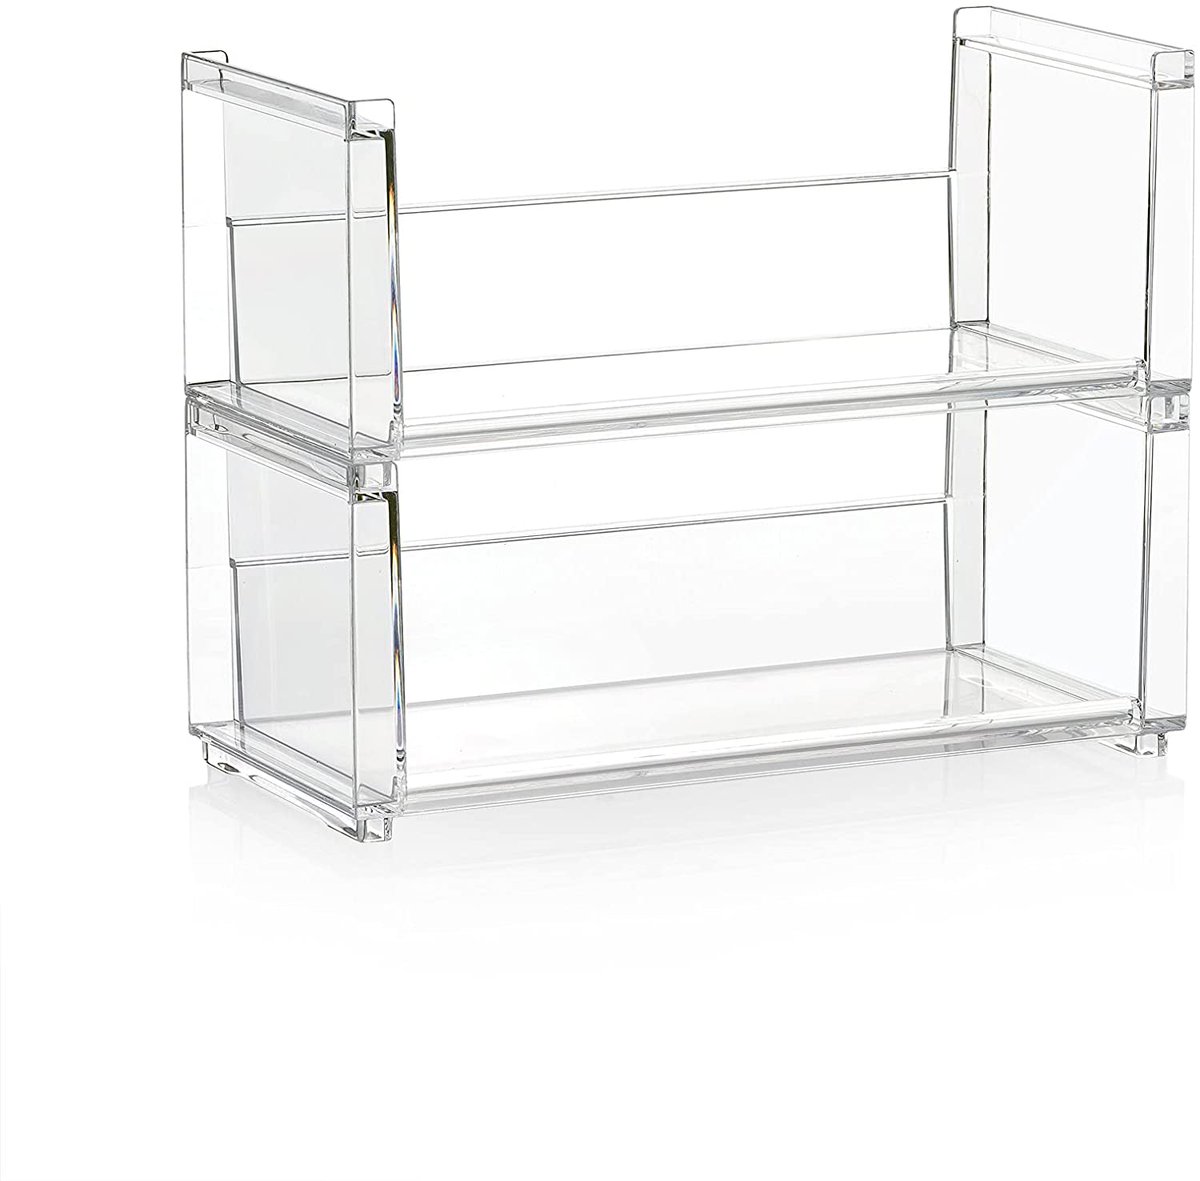 Product Name: Clear Stackable Shelves
Discount: 40%
Code: K9S7SH58

